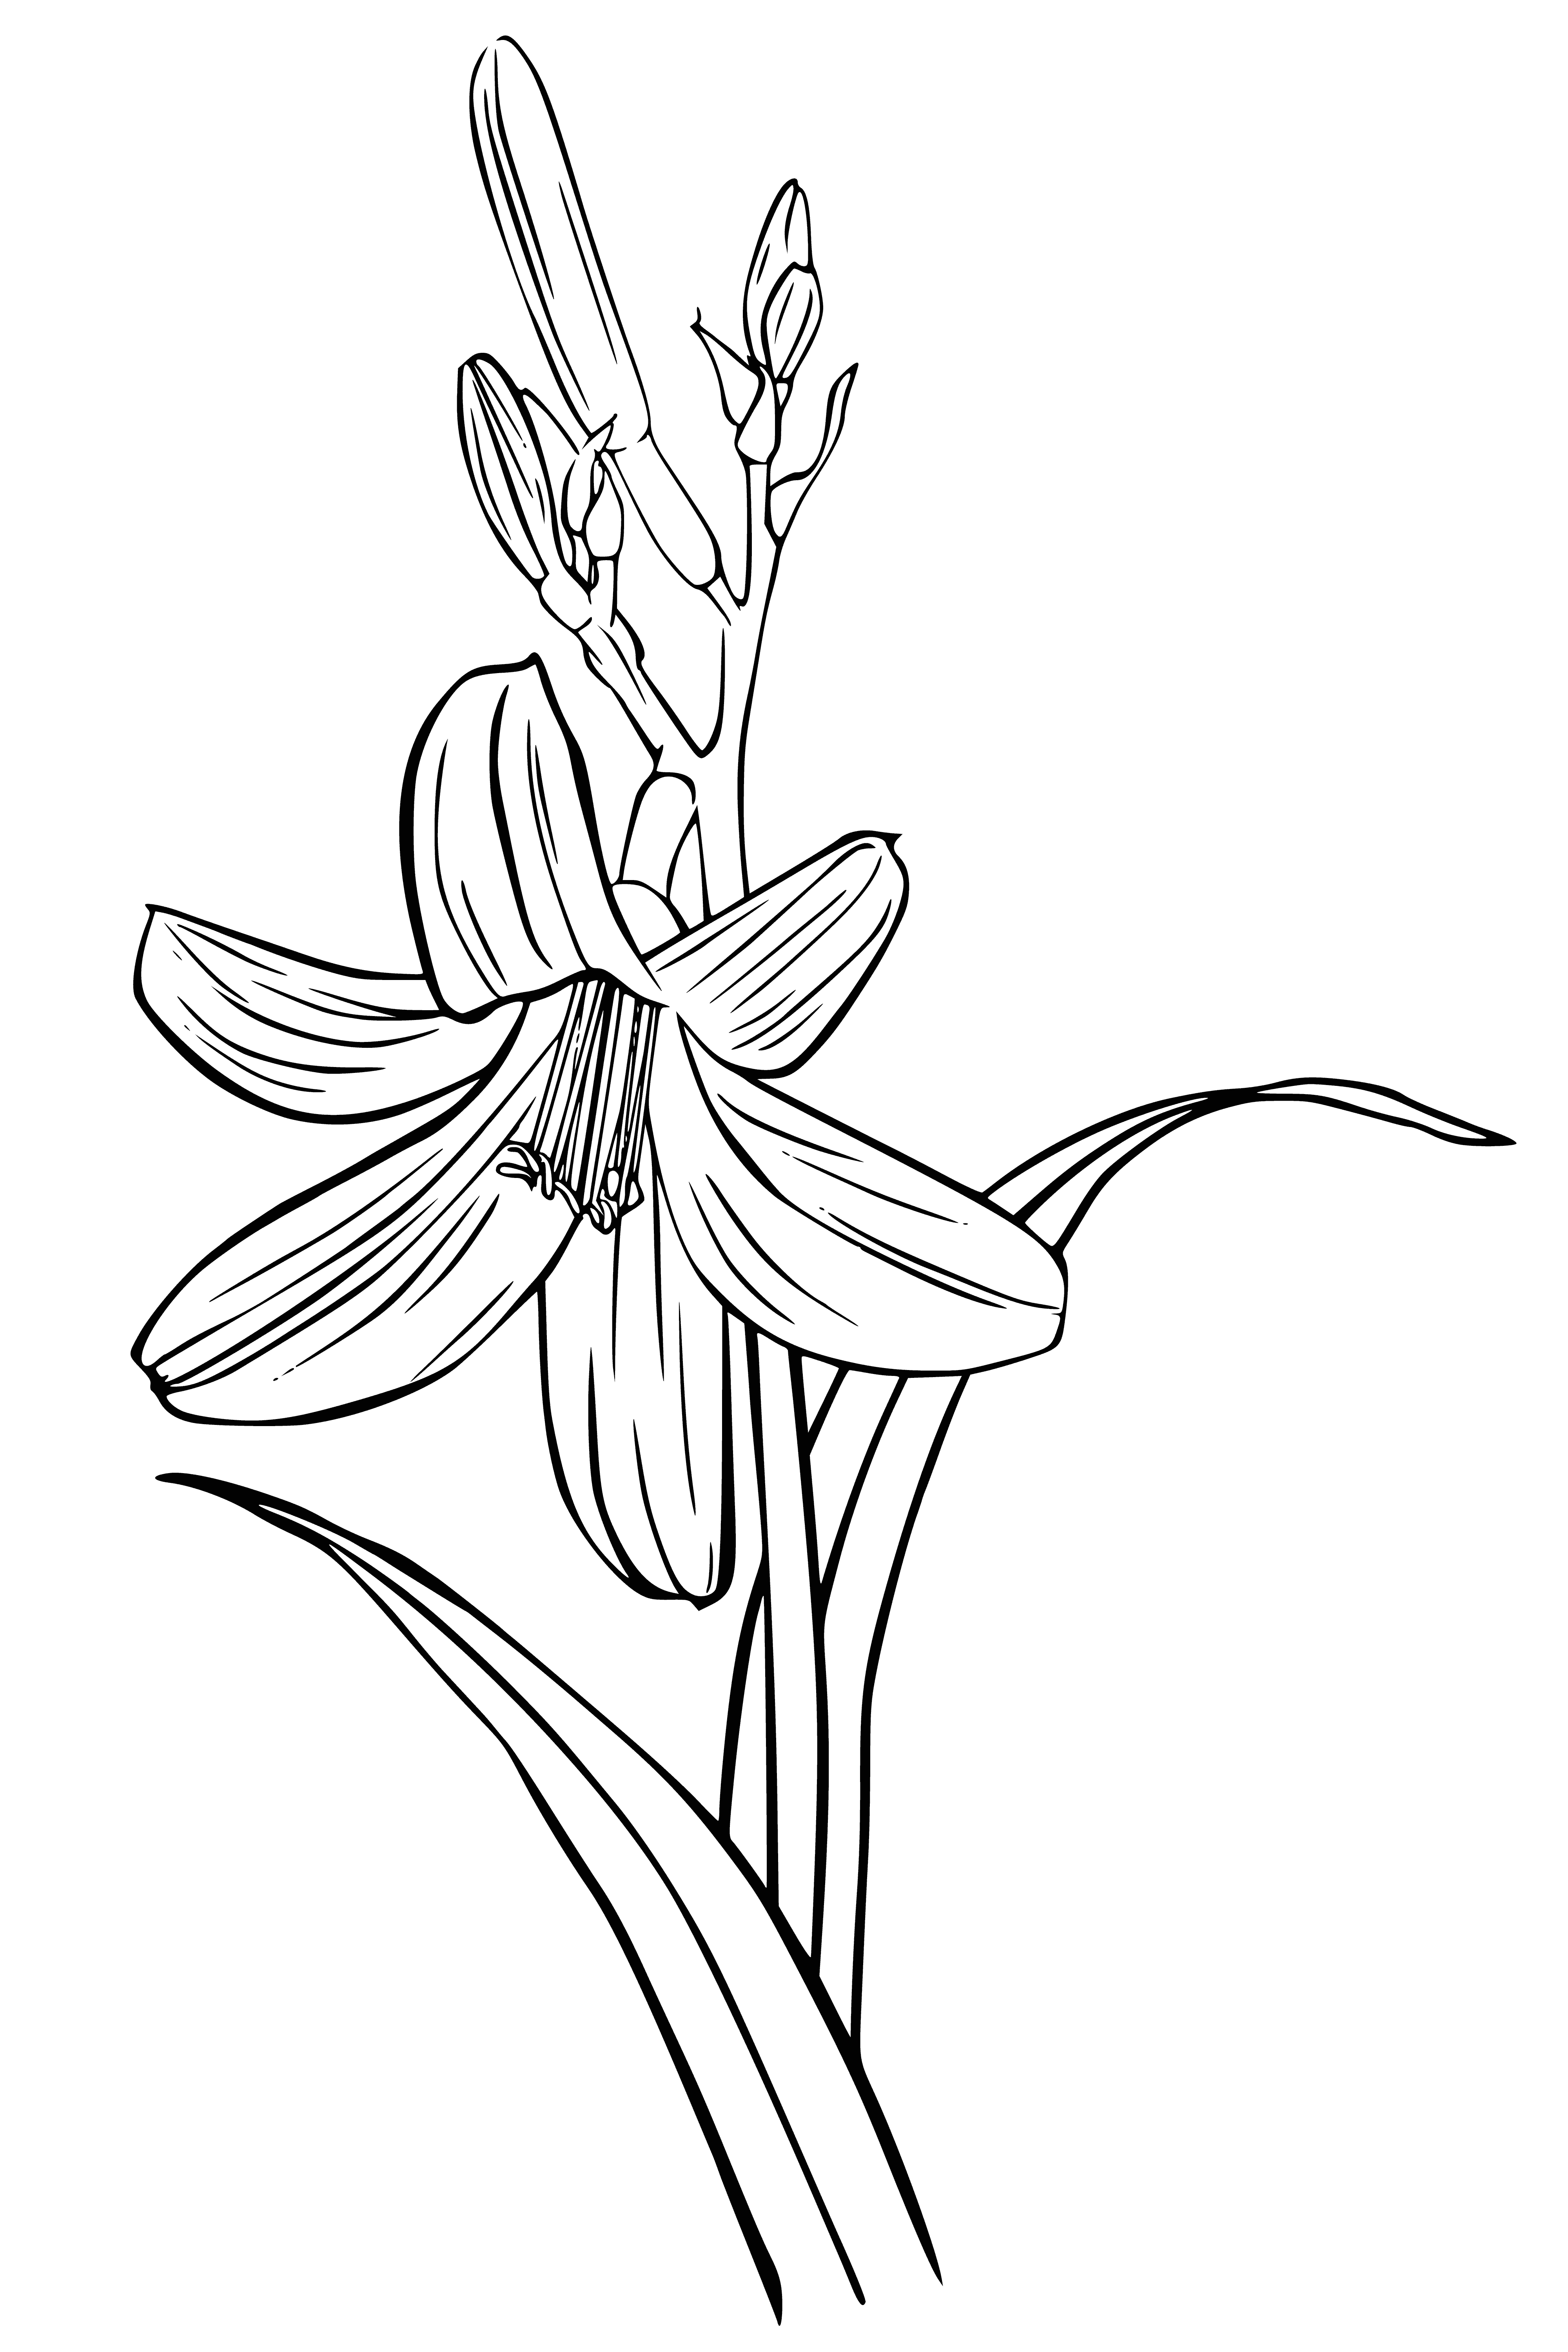 coloring page: Symbol of purity, lilies bloom in many colors and have 6 petal star-like shape. Often used in religious ceremonies. #floweringplants